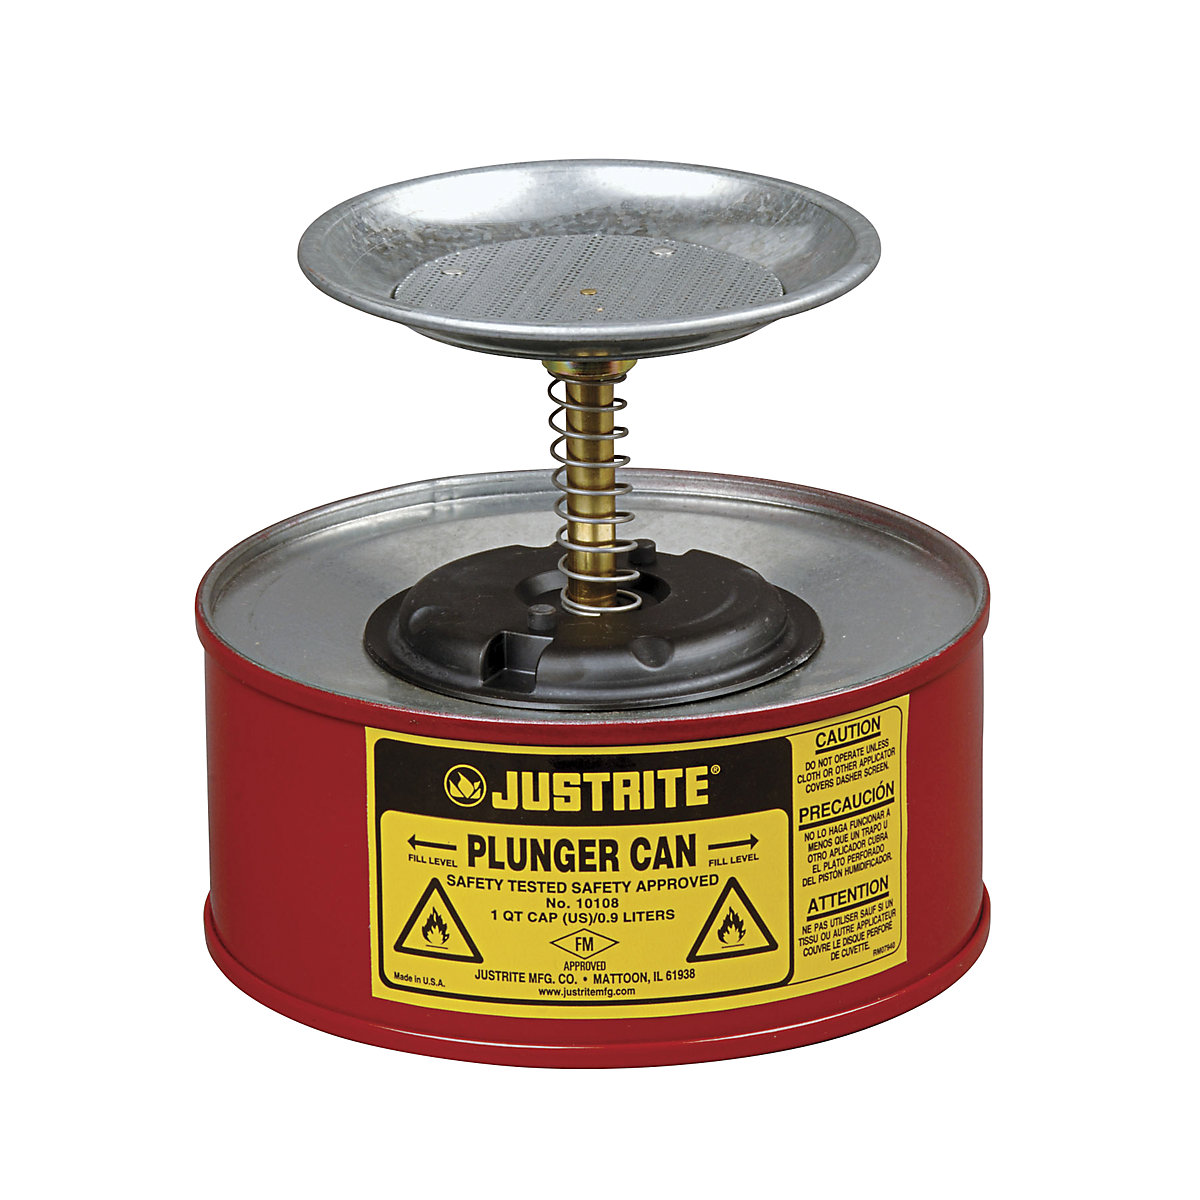 Plunger can - Justrite